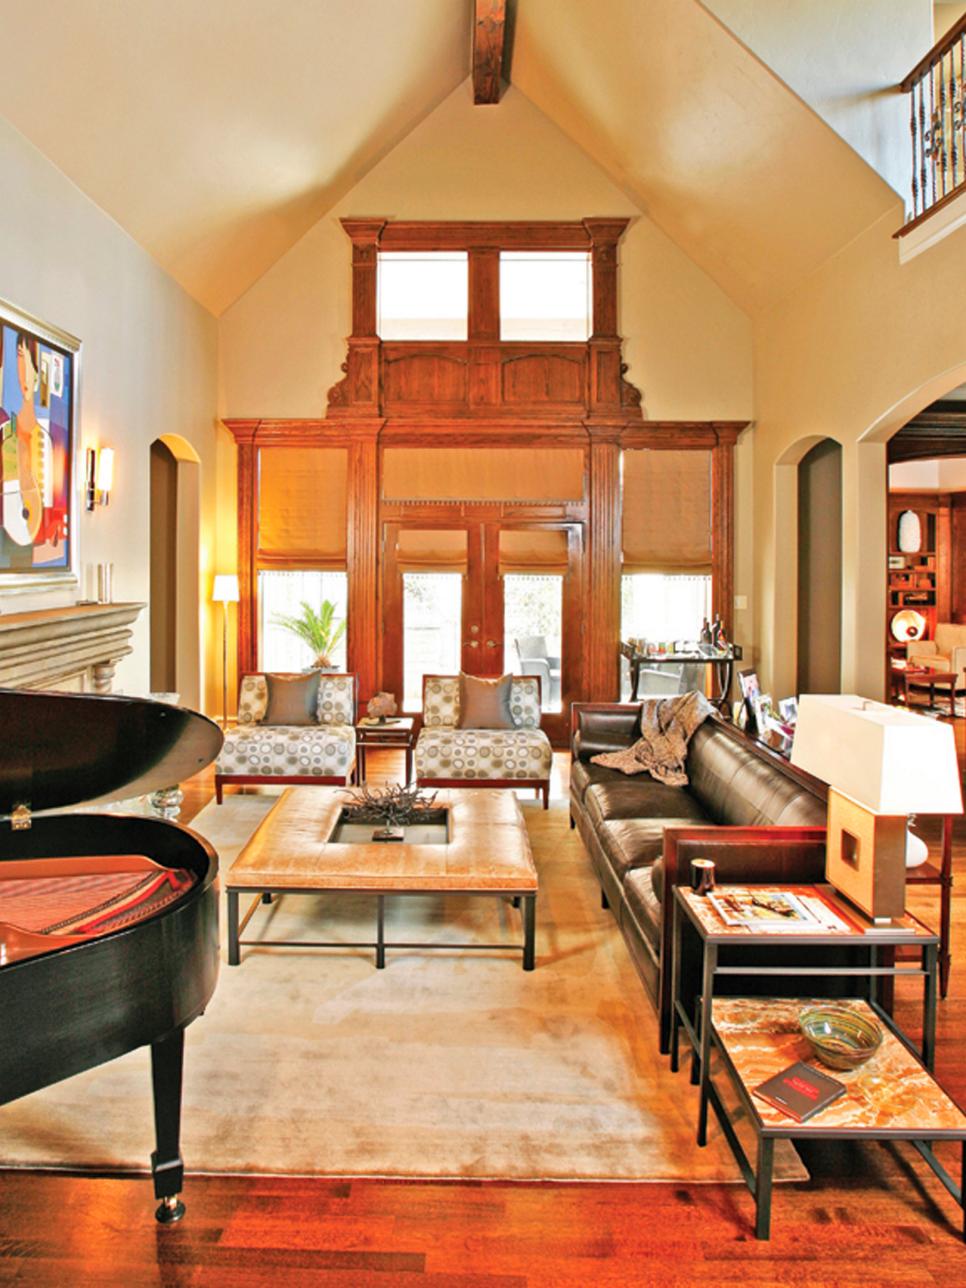 Eclectic Living Room With Grand Wooden Entryway in Background 